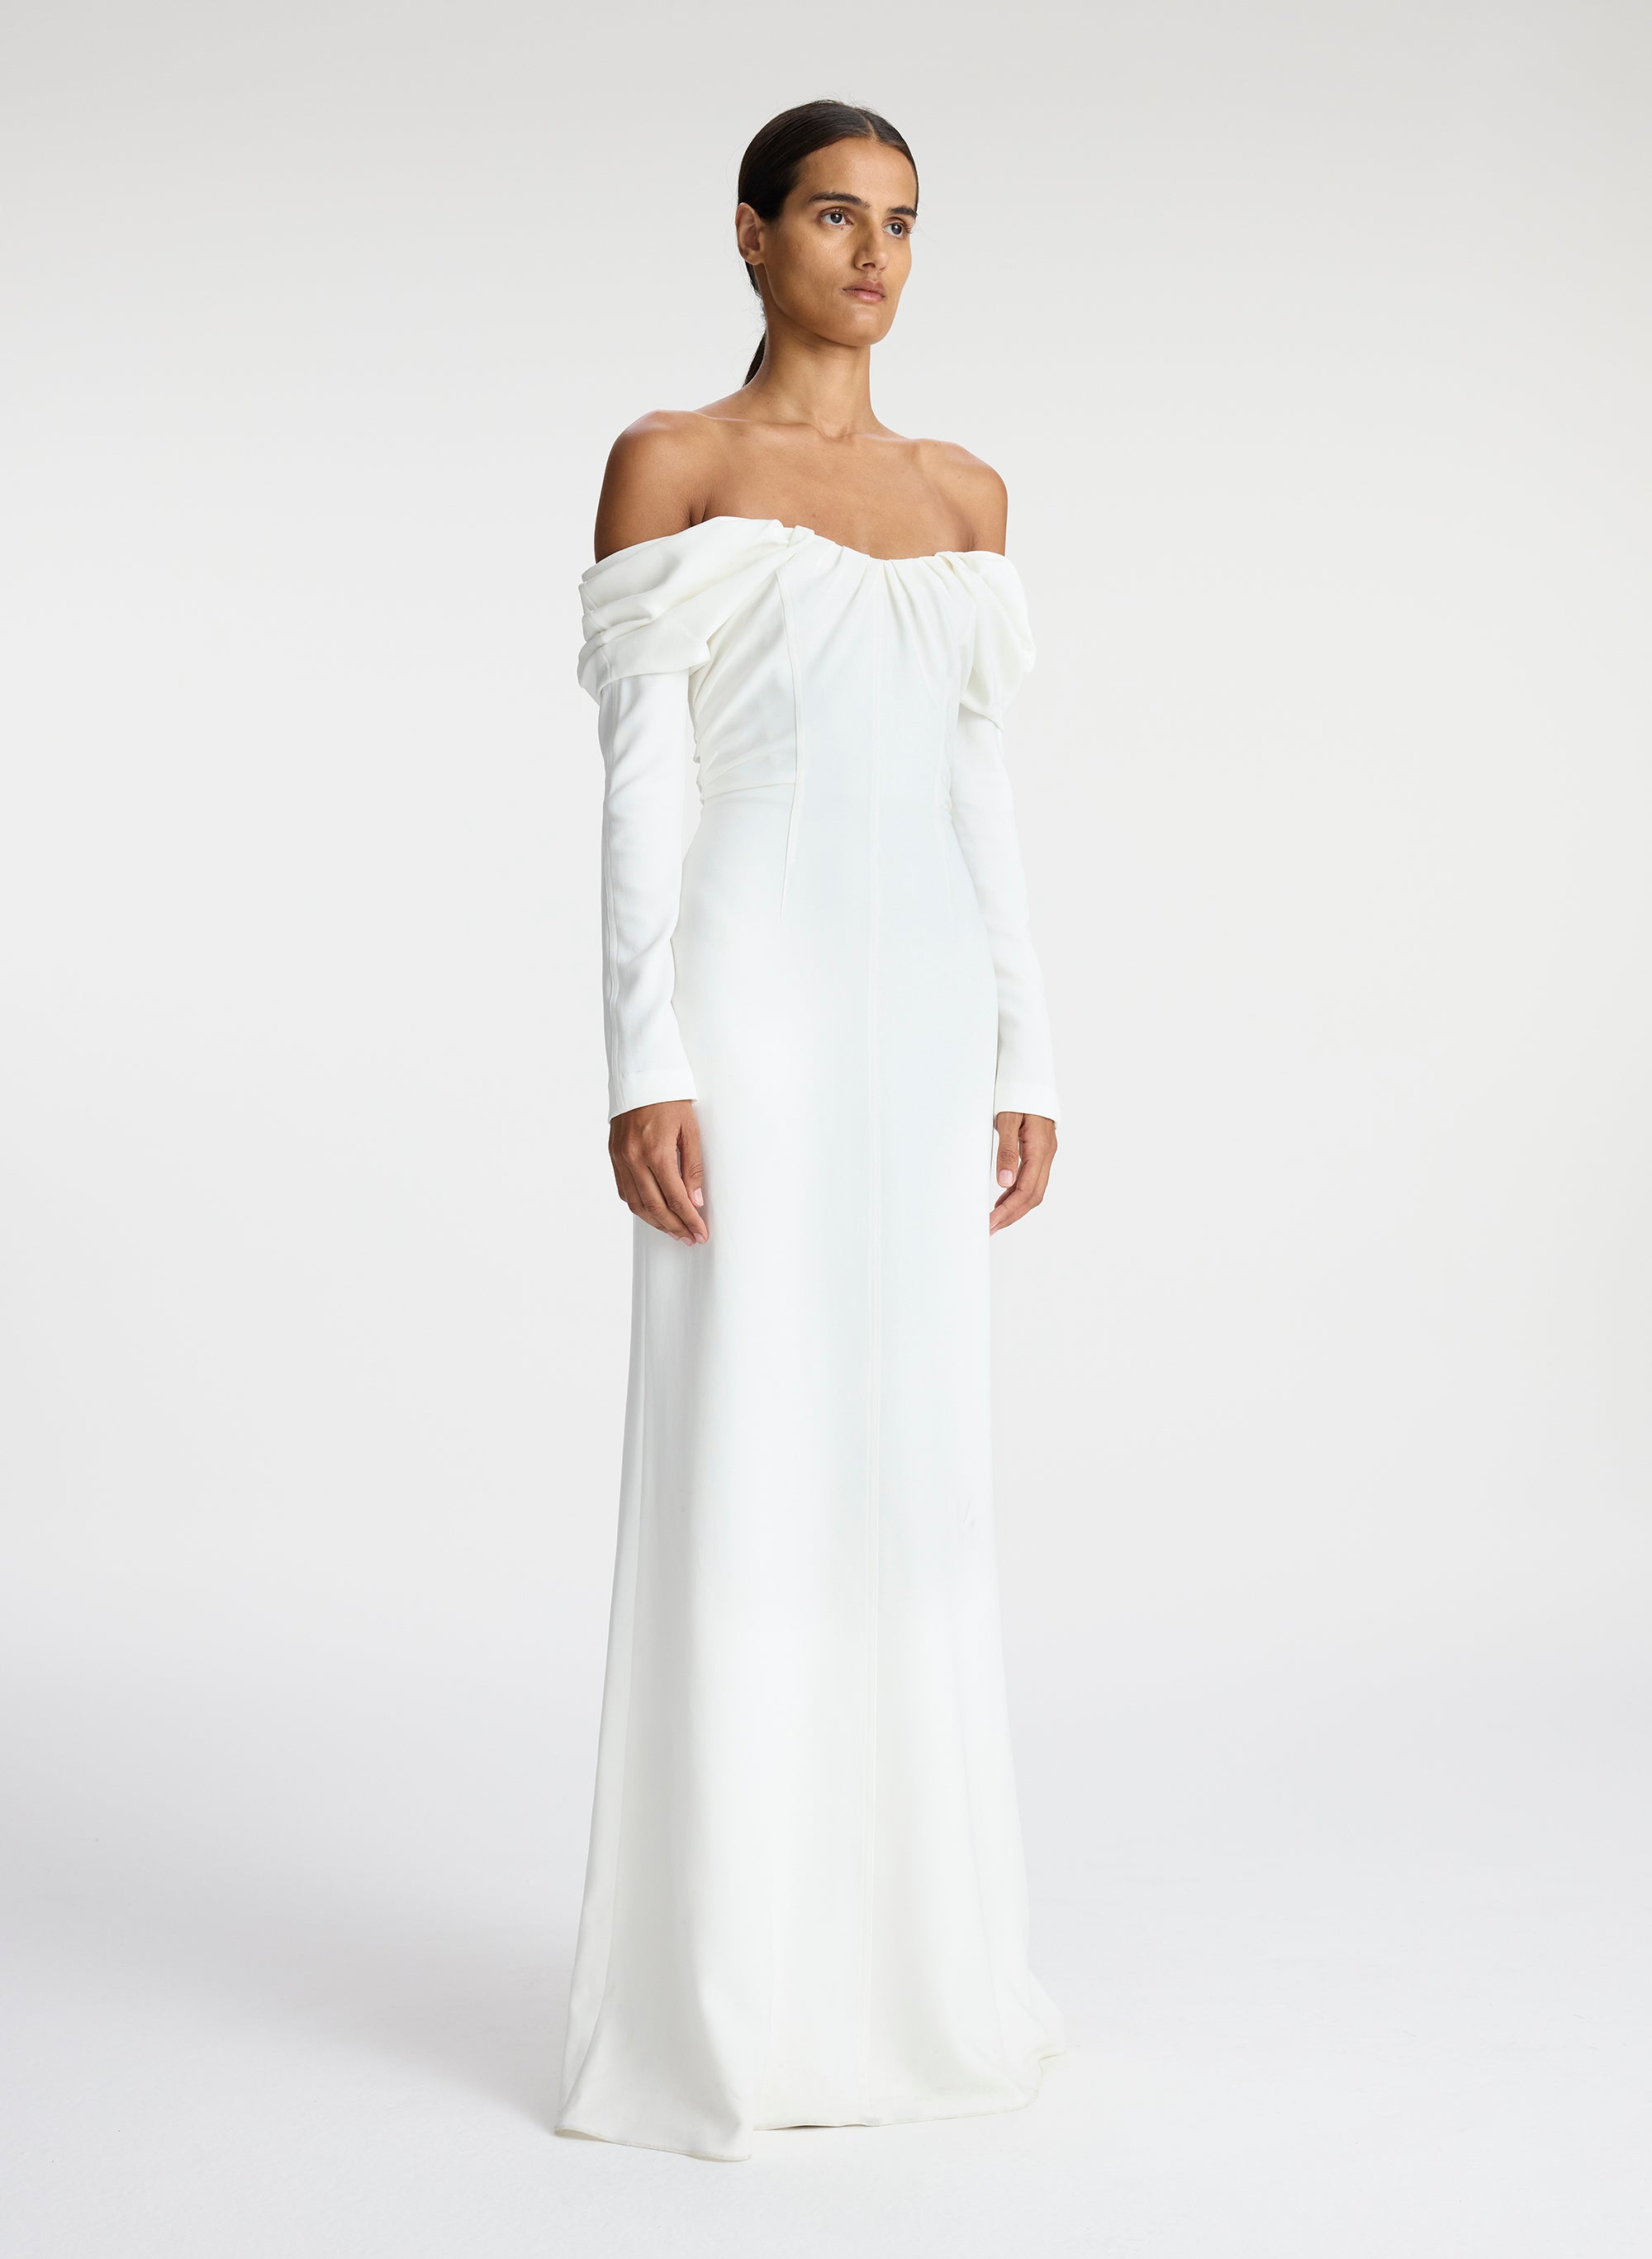 Off The Shoulder Chiffon Satin Dress from Camille La Vie and Group USA